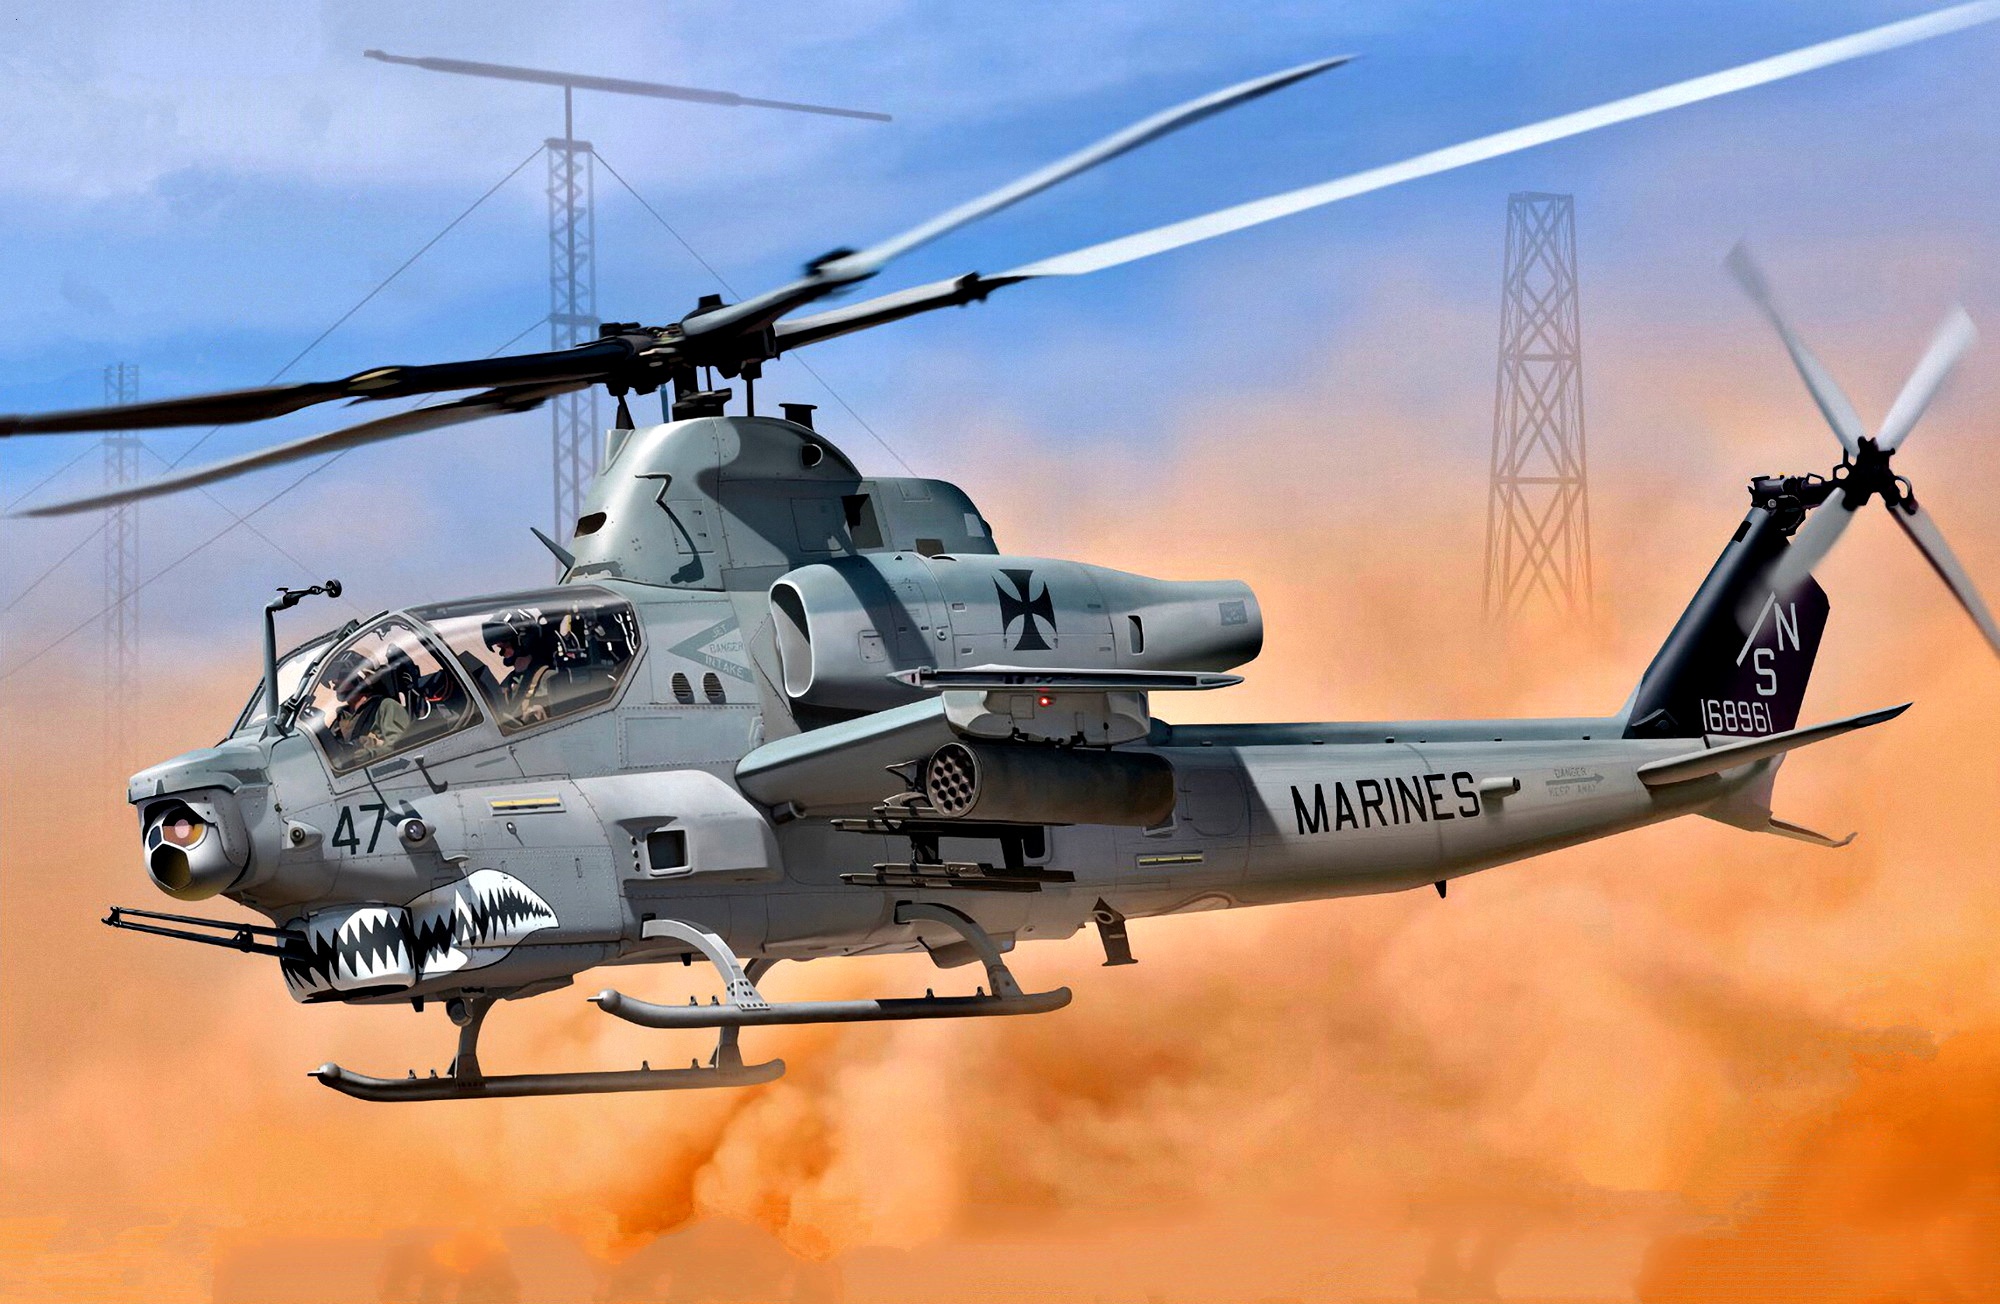 Aircraft Artistic Attack Helicopter Bell Ah 1z Viper Helicopter 2000x1304